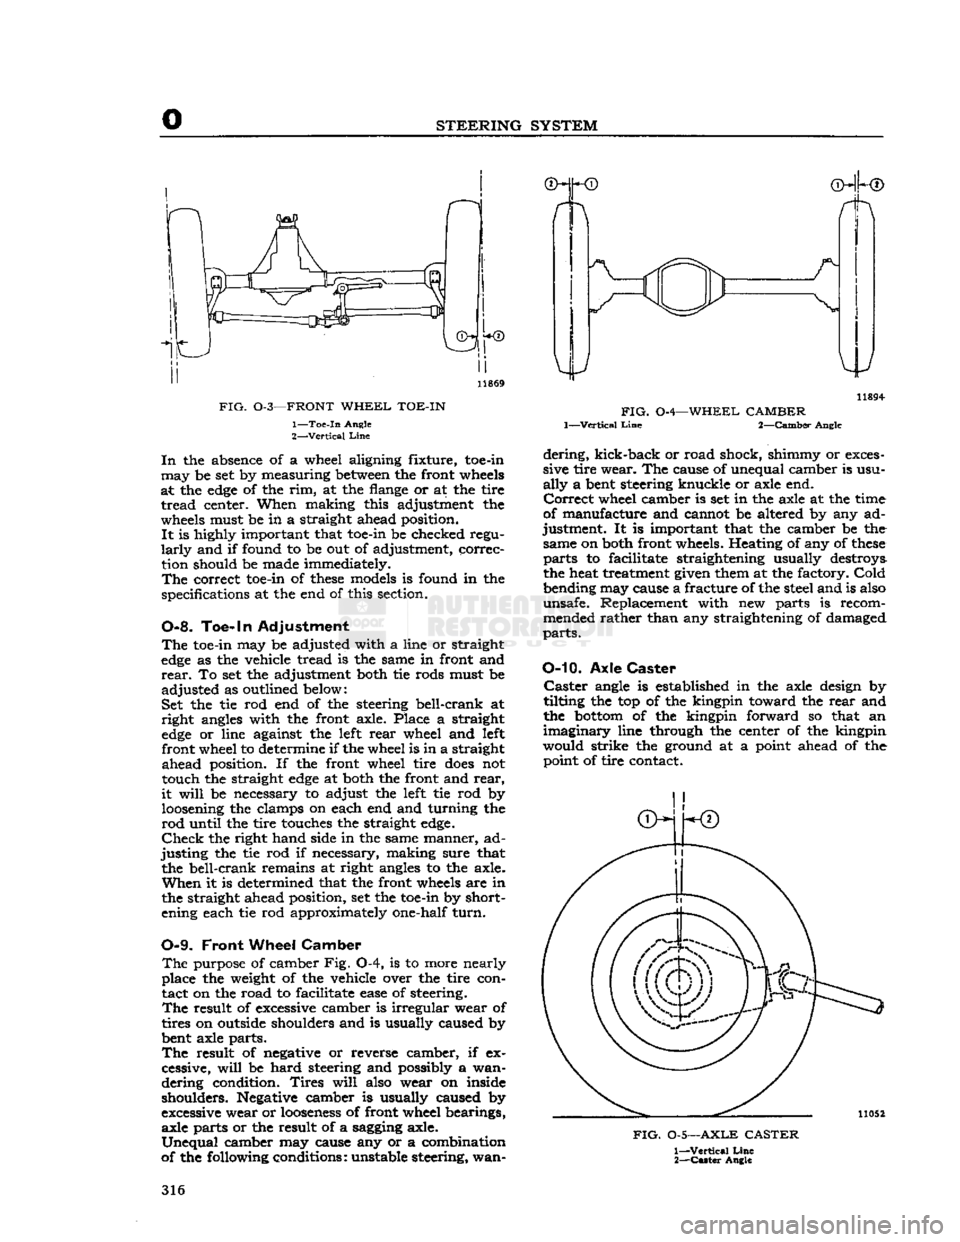 JEEP CJ 1953  Service Manual 
o 
STEERING SYSTEM 
FIG.
 0-3—FRONT
 WHEEL
 TOE-IN 
 1—
 Toe-in
 Angle 

2—
 Vertical
 Line 
 In
 the absence of a wheel aligning fixture, toe-in 

may
 be set by measuring
 between
 the front 